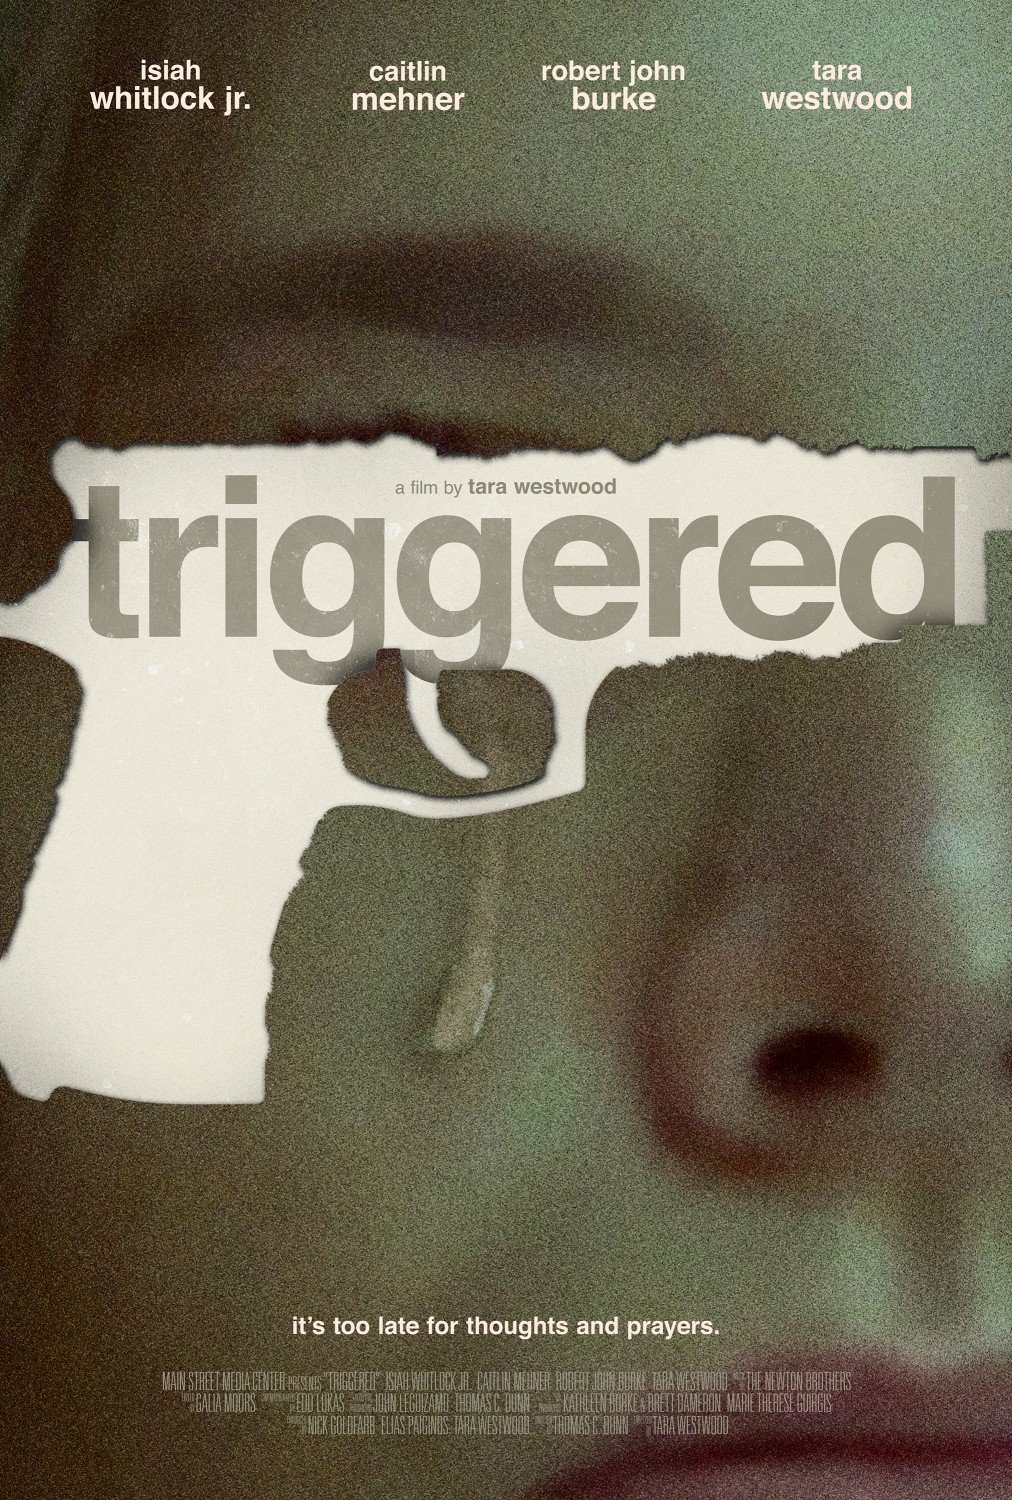 Extra Large Movie Poster Image for Triggered